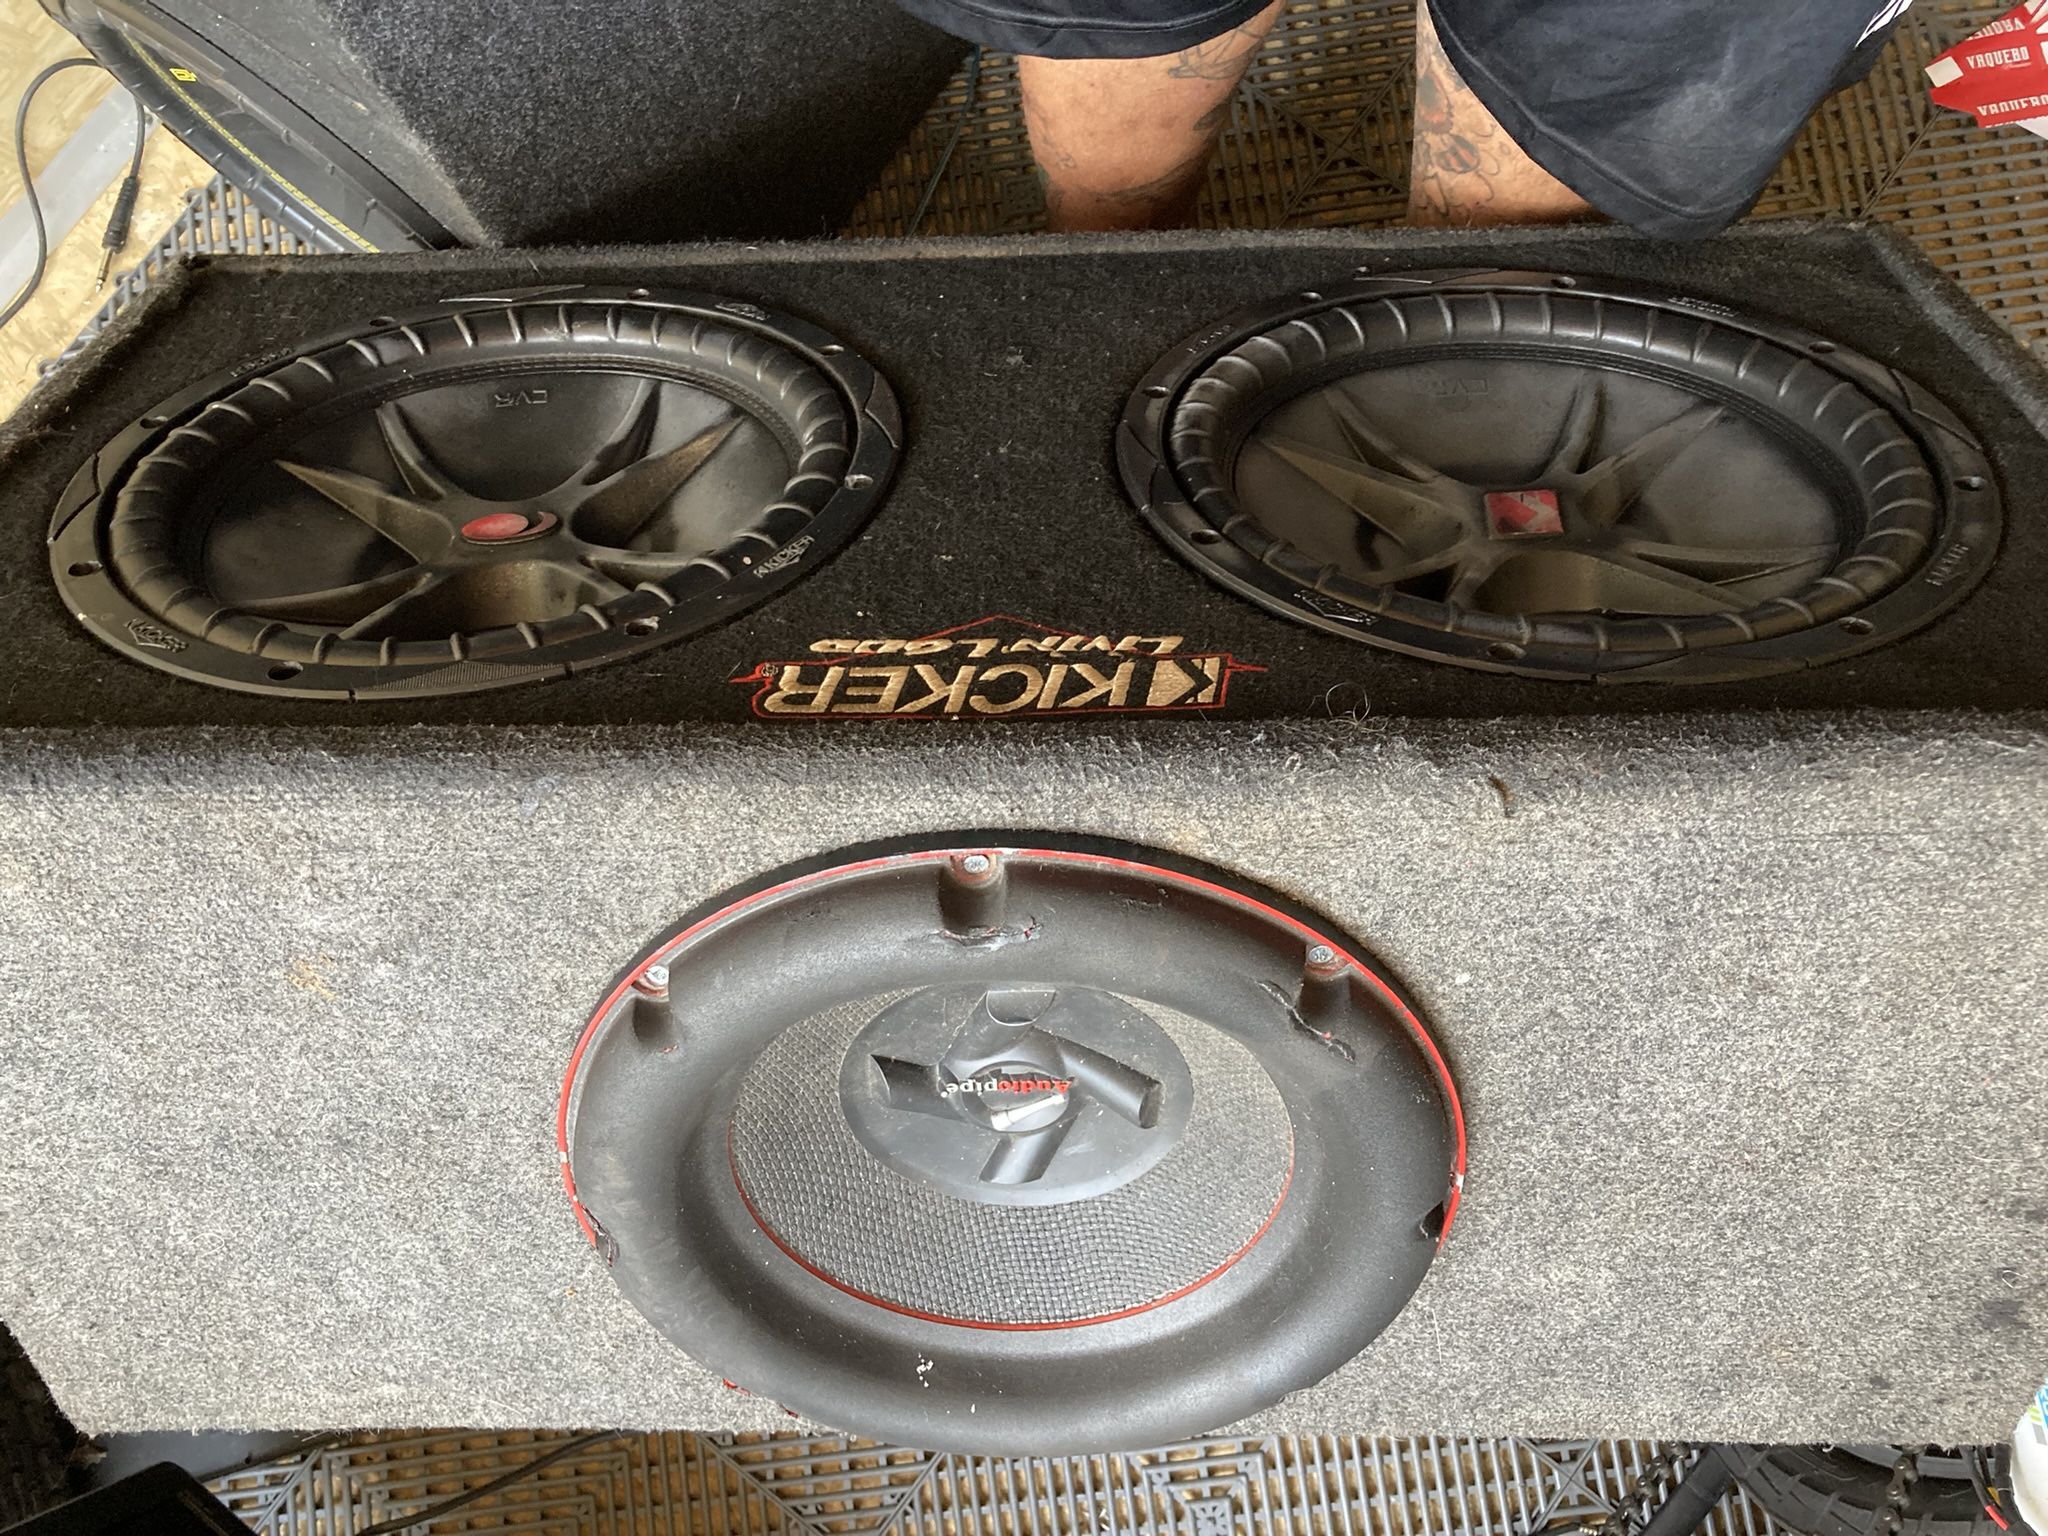 Kicker Comps 12” And A 12” Audio Pipe Competition Sub